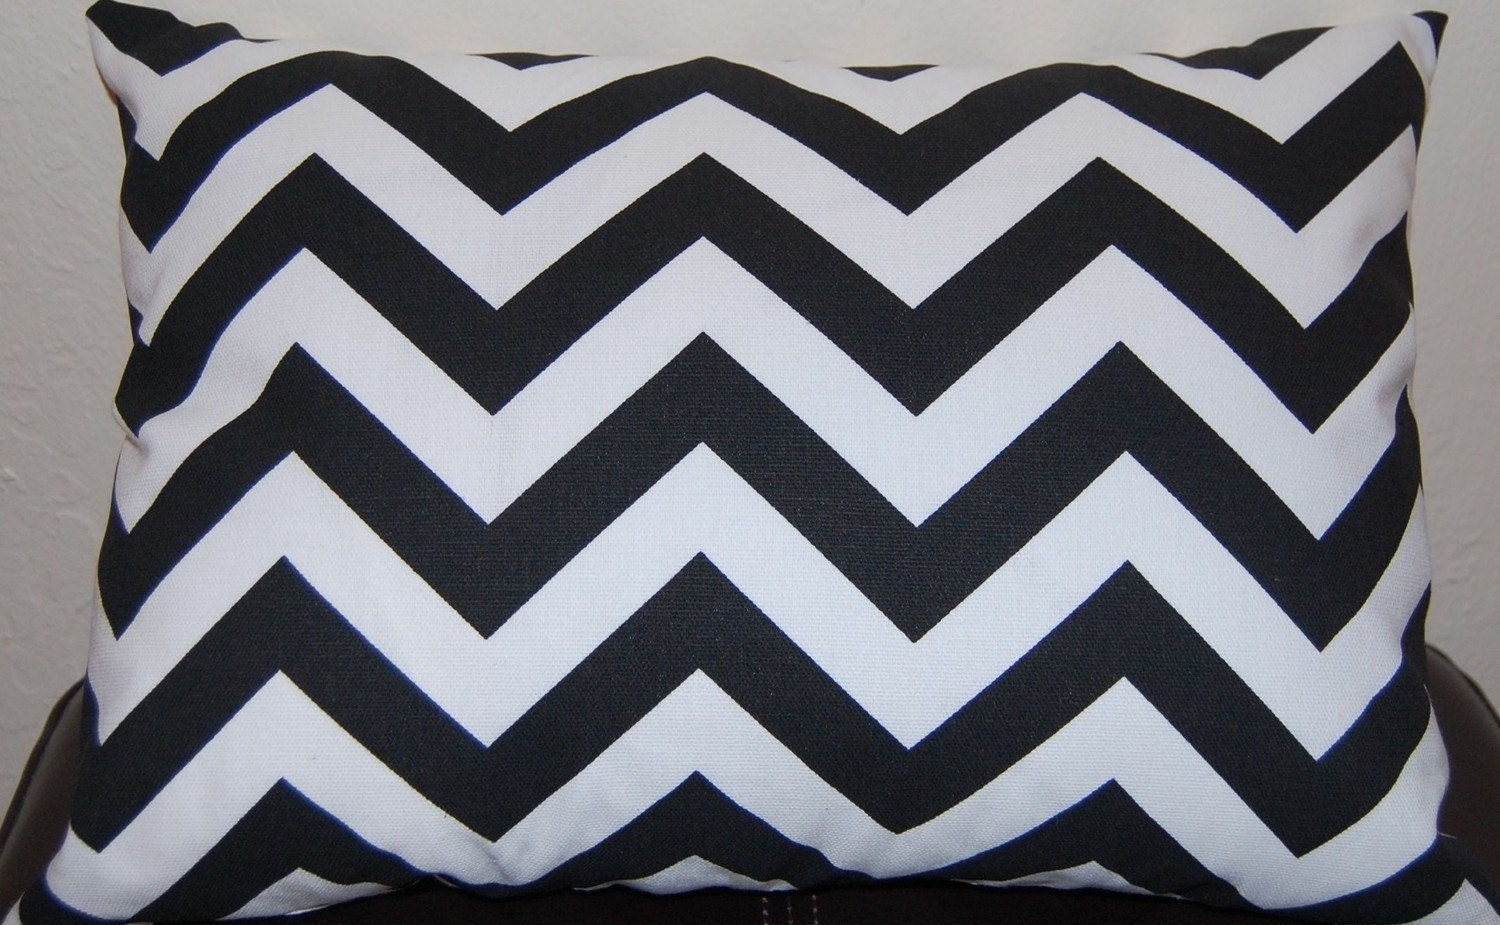 Chevron Lumbar Pillow Black and White Pillow Cover Accent Pillow Cover - 12x16 or 12 x 18 Inches